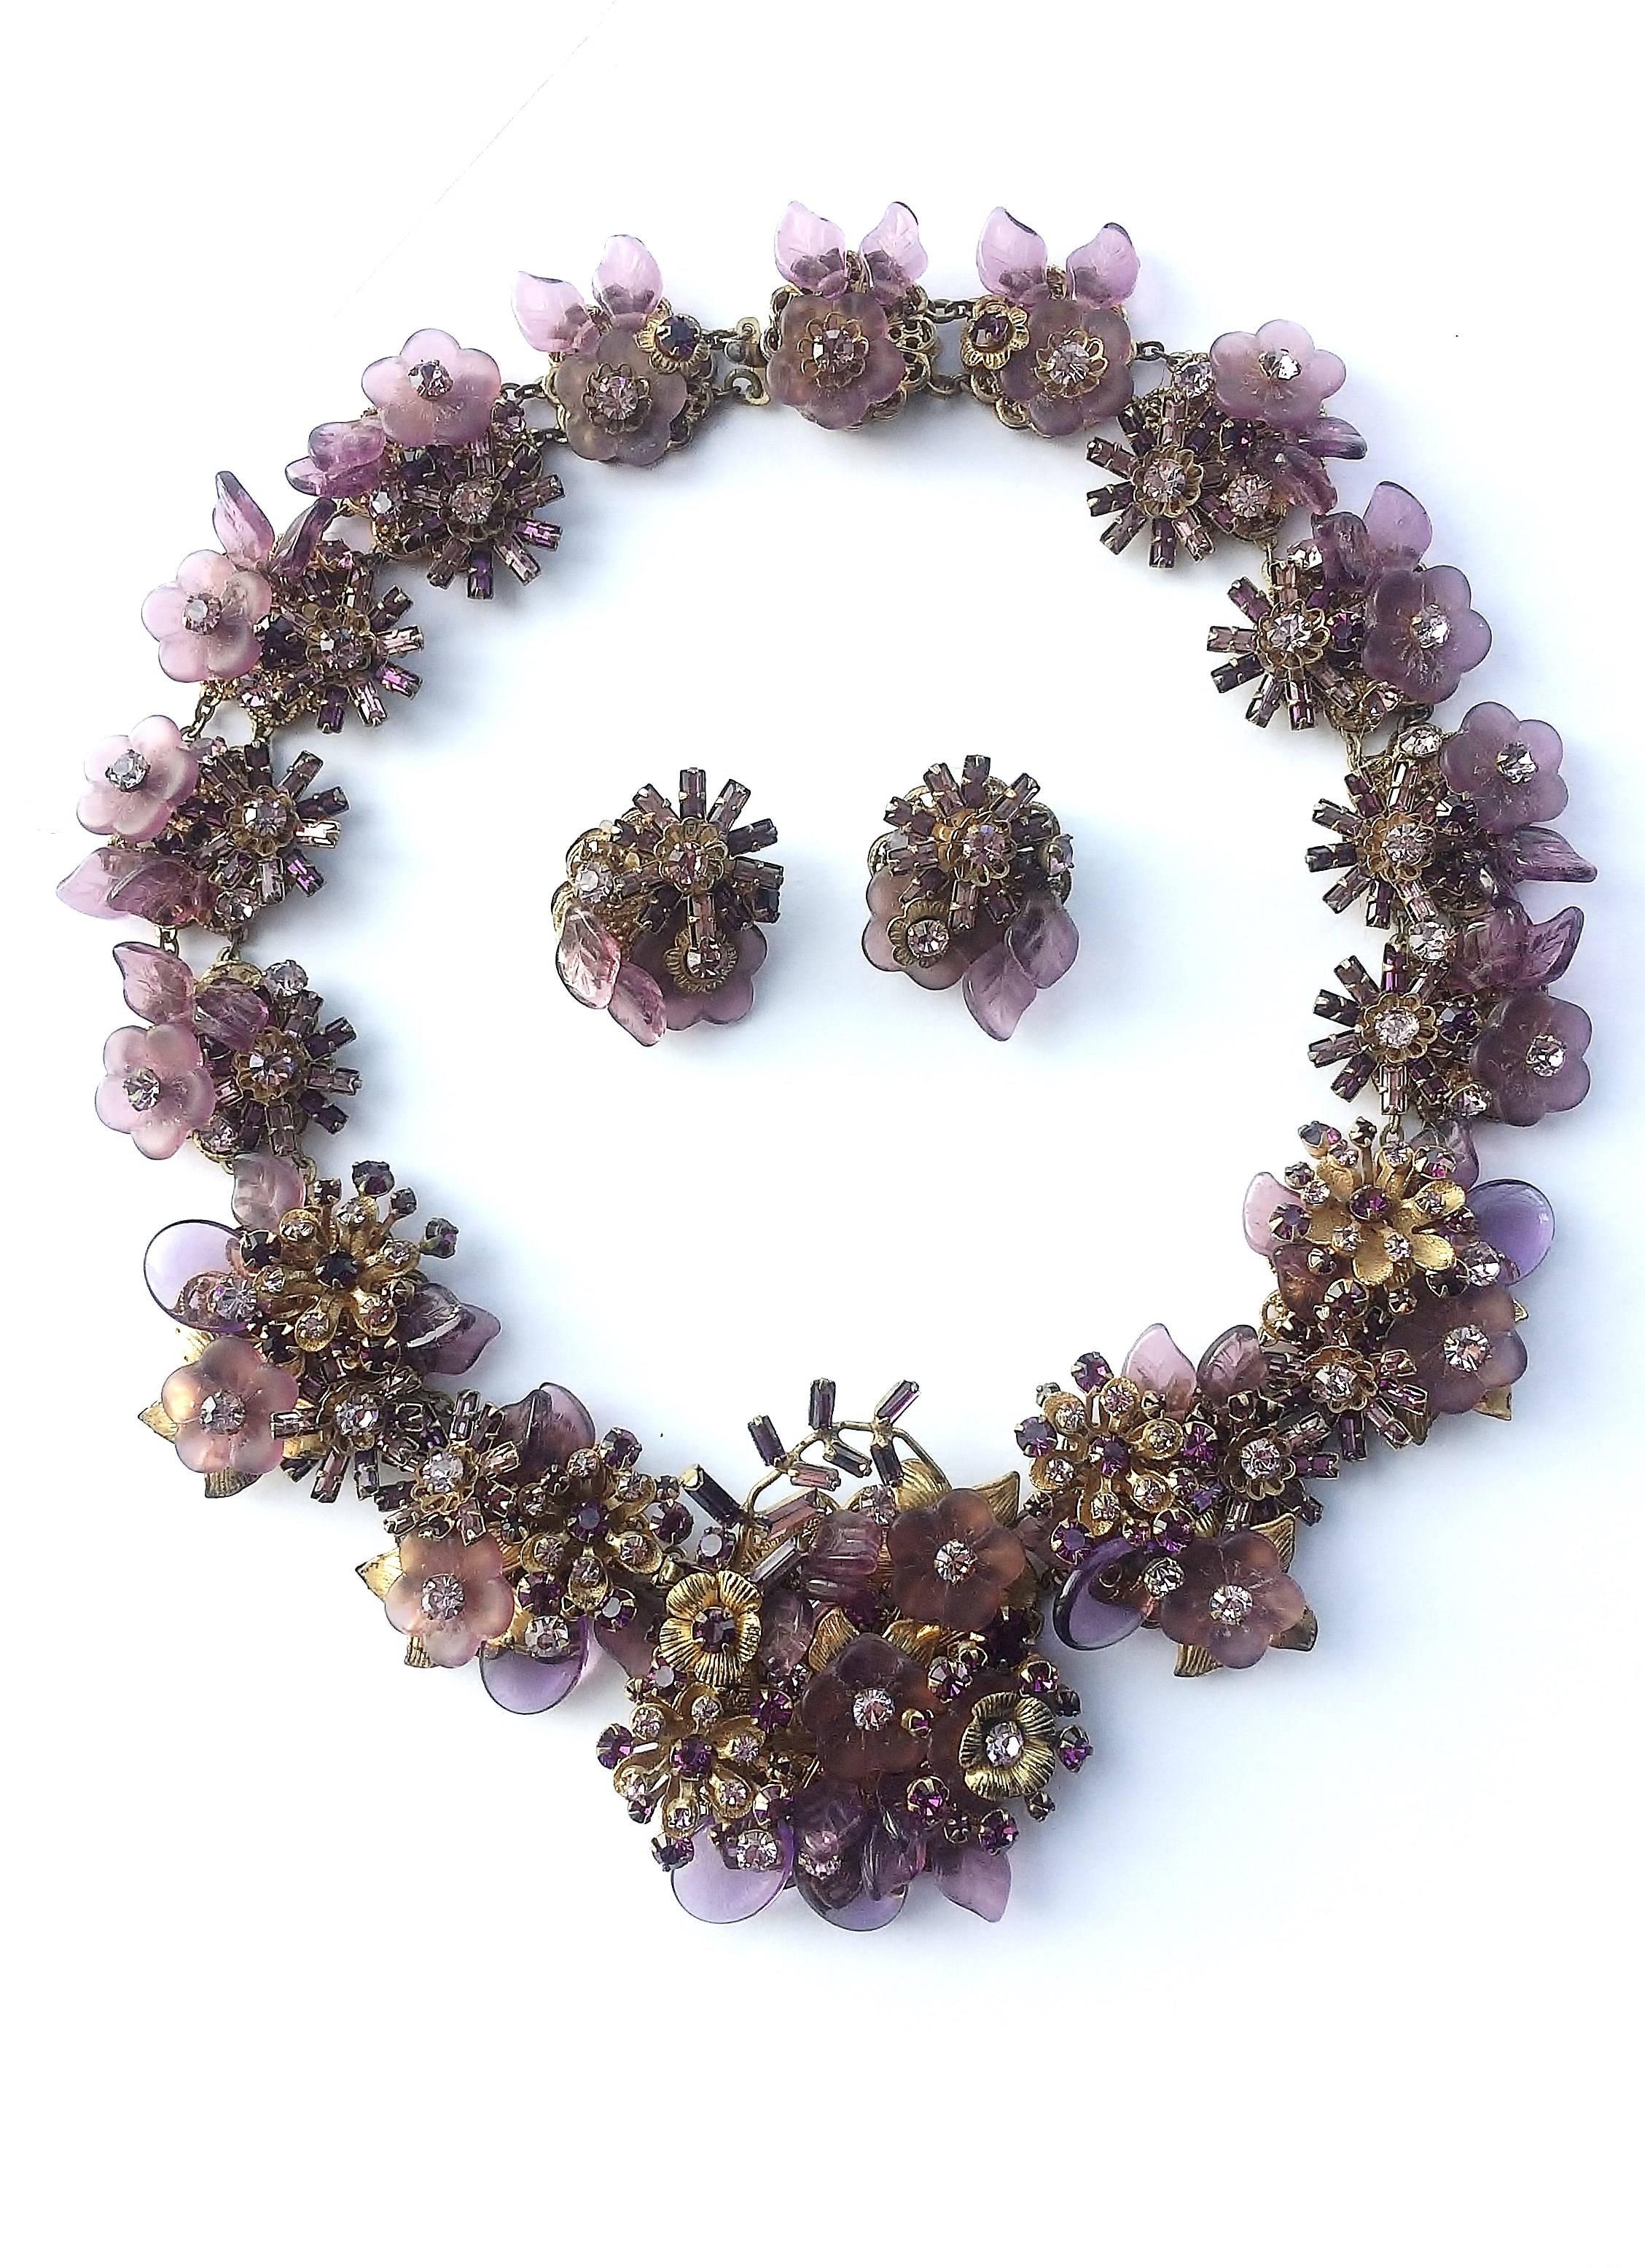 Very beautiful necklace and earrings, designed by Robert Clark for Miriam Haskell in the 1960s. Highly typical of Robert Clark designs, with intricate work and detail round the whole of the necklace, to the back, the colour is a beautiful purple,